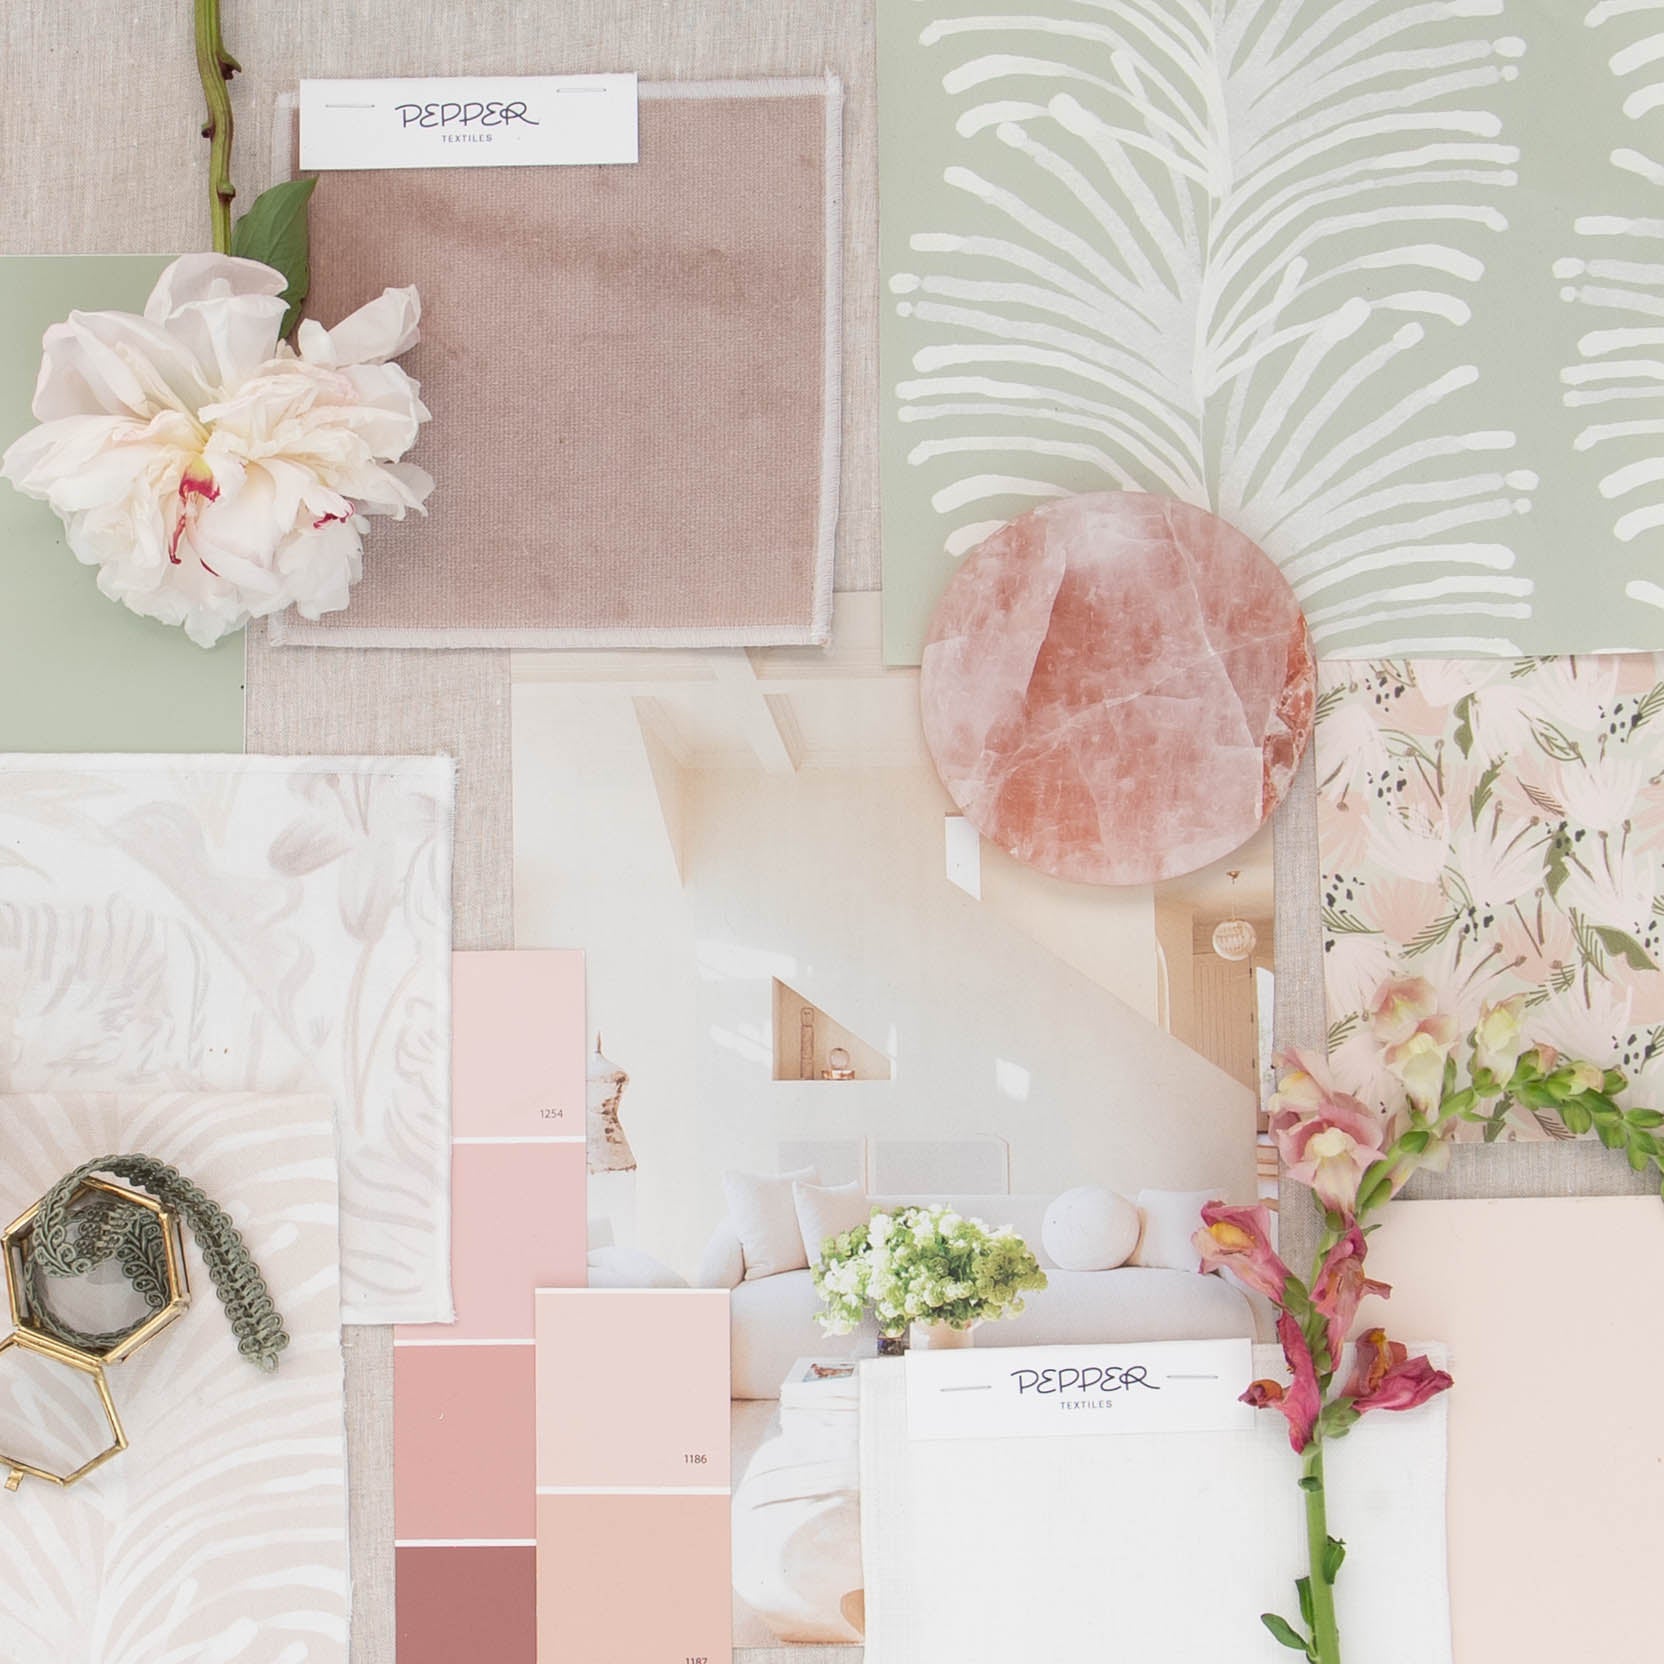 Interior design moodboard and fabric inspirations with Lilac velvet swatch, Sage Green Palm printed wallpaper swatch, and Pink Floral printed cotton swatch